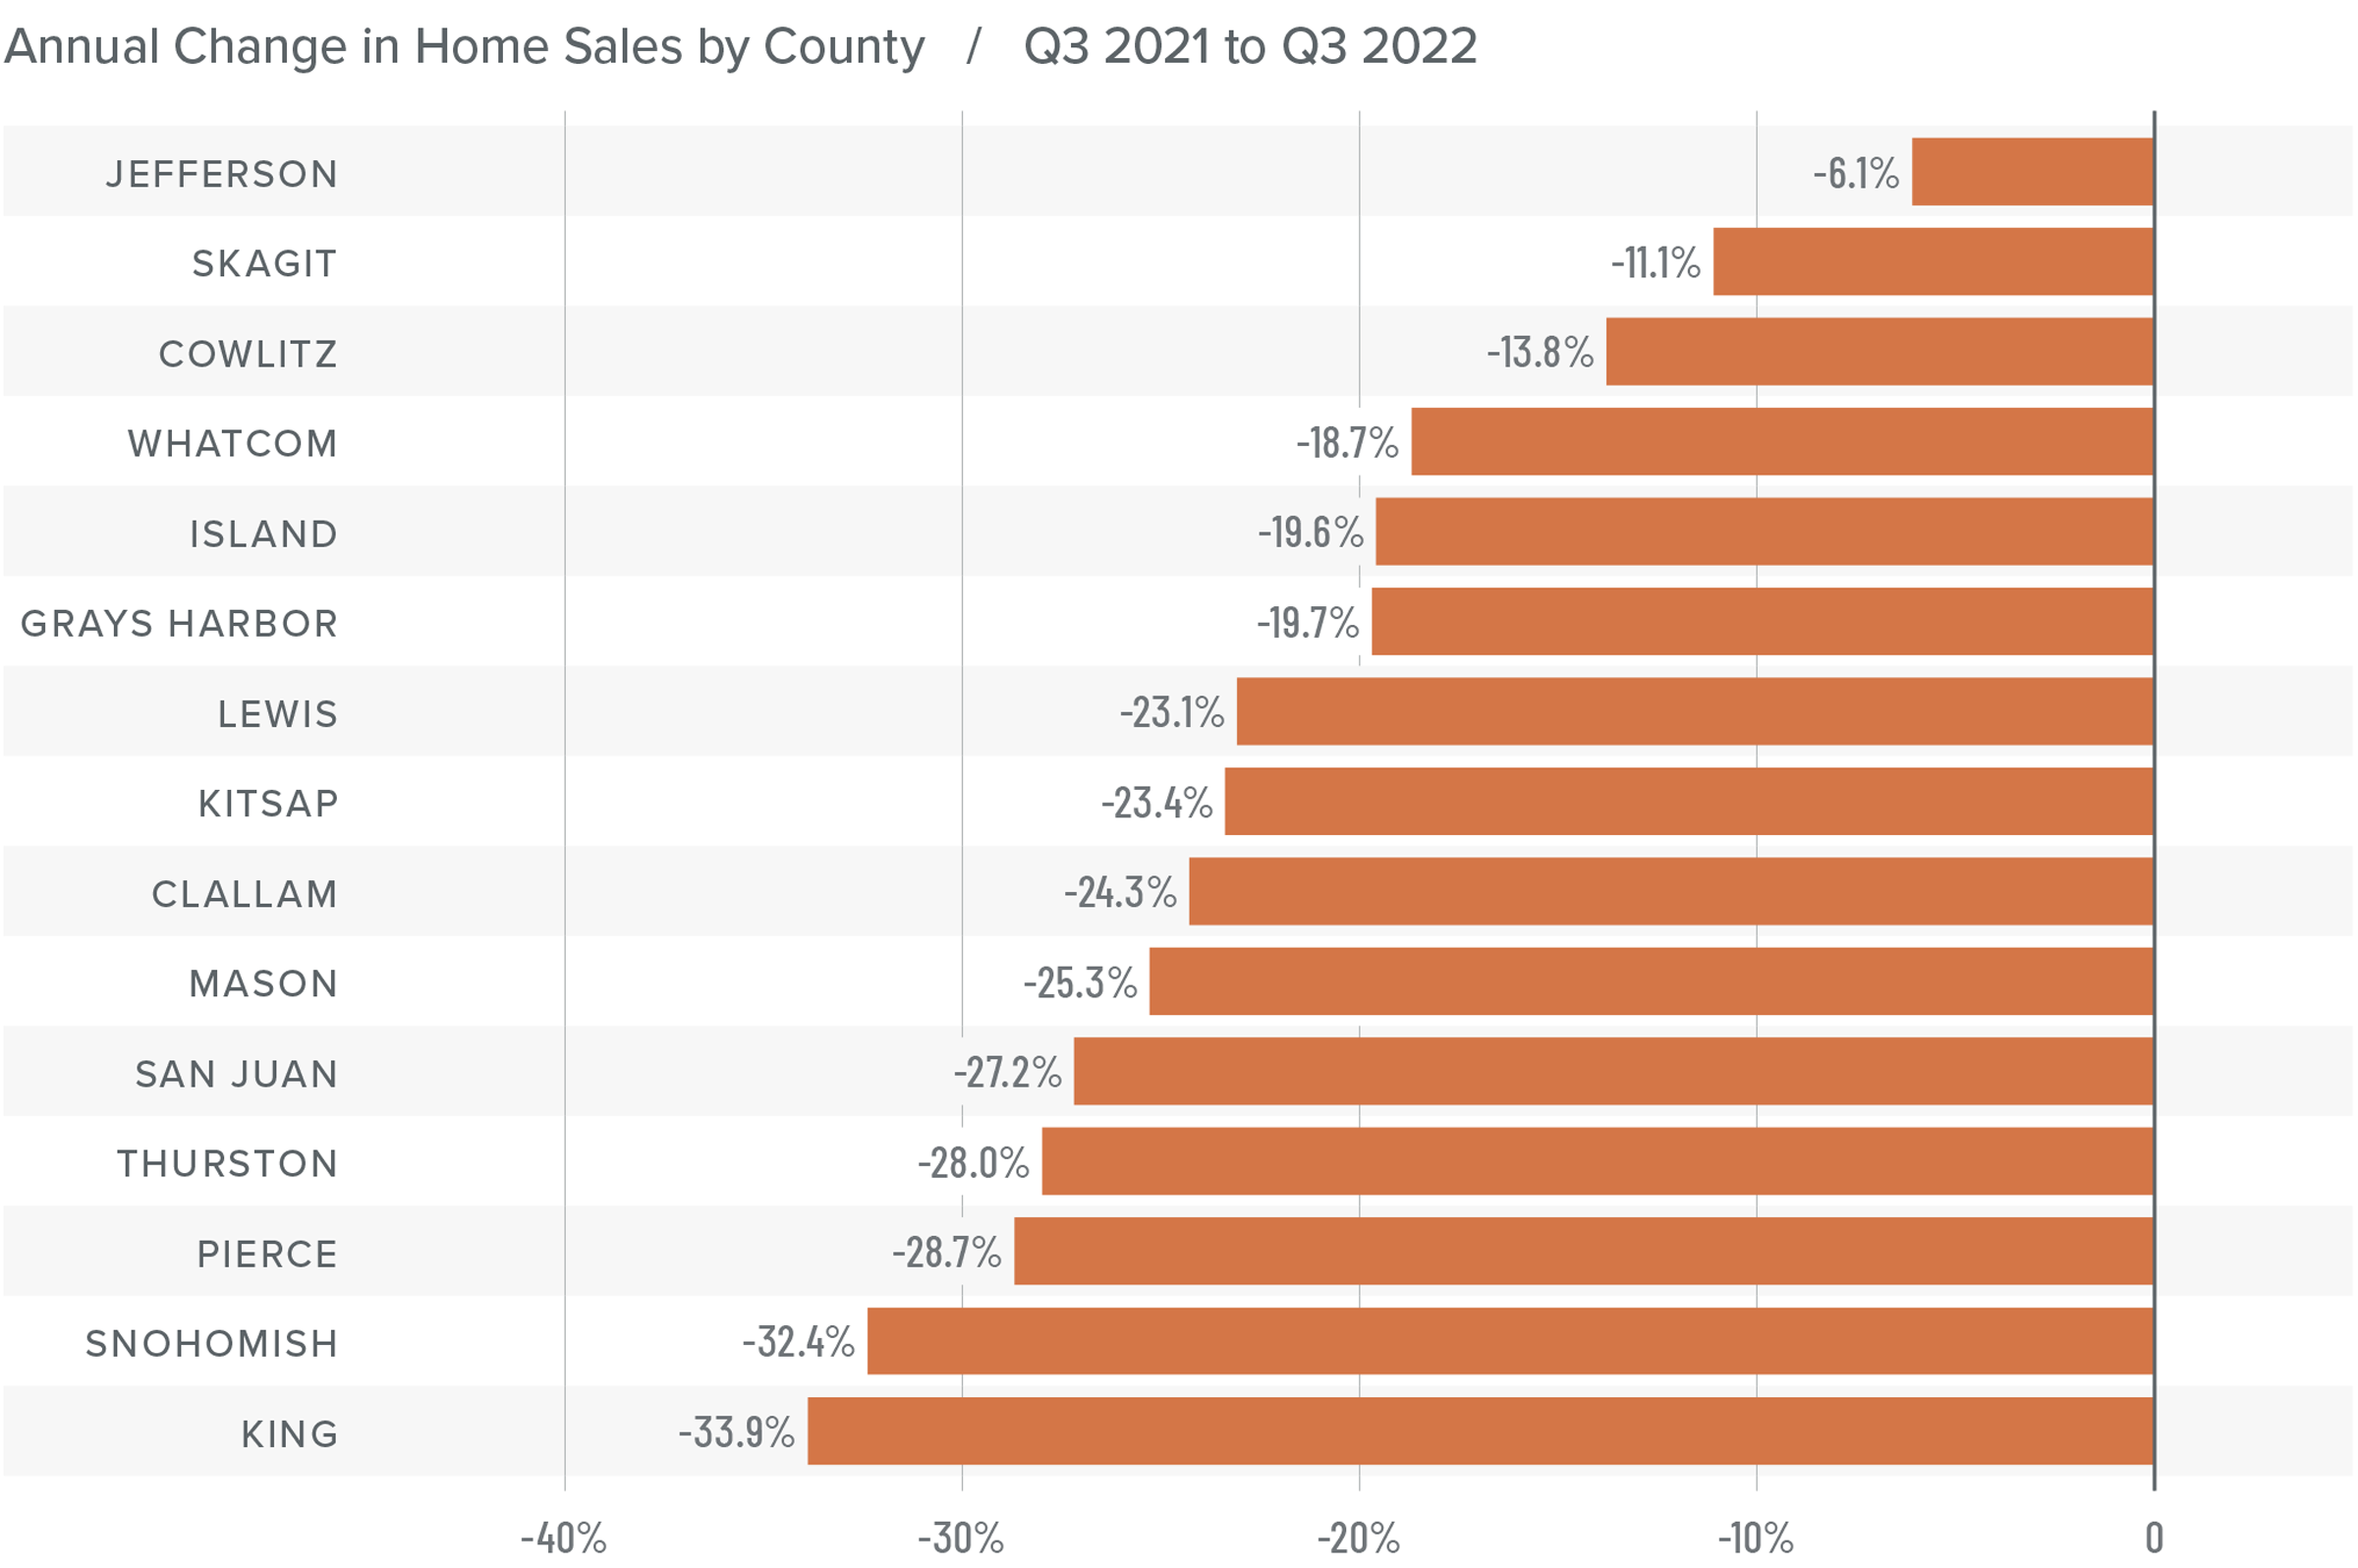 A bar graph showing the annual change in home sales for various counties in Western Washington from Q3 2021 to Q3 2022. All counties have a negative percentage year-over-year change. Here are the totals: Jefferson at -6.1%, Skagit at -11.1%, Cowlitz -13.8%, Whatcom -18.7%, Island -19.6%, Grays Harbor -19.7%, Lewis -23.1%, Kitsap -23.4%, Clallam -24.3%, Mason -25.3%, San Juan -27.2%, Thurston -28%, Pierce -28.7%, Snohomish -32.4%, and King -33.9%.